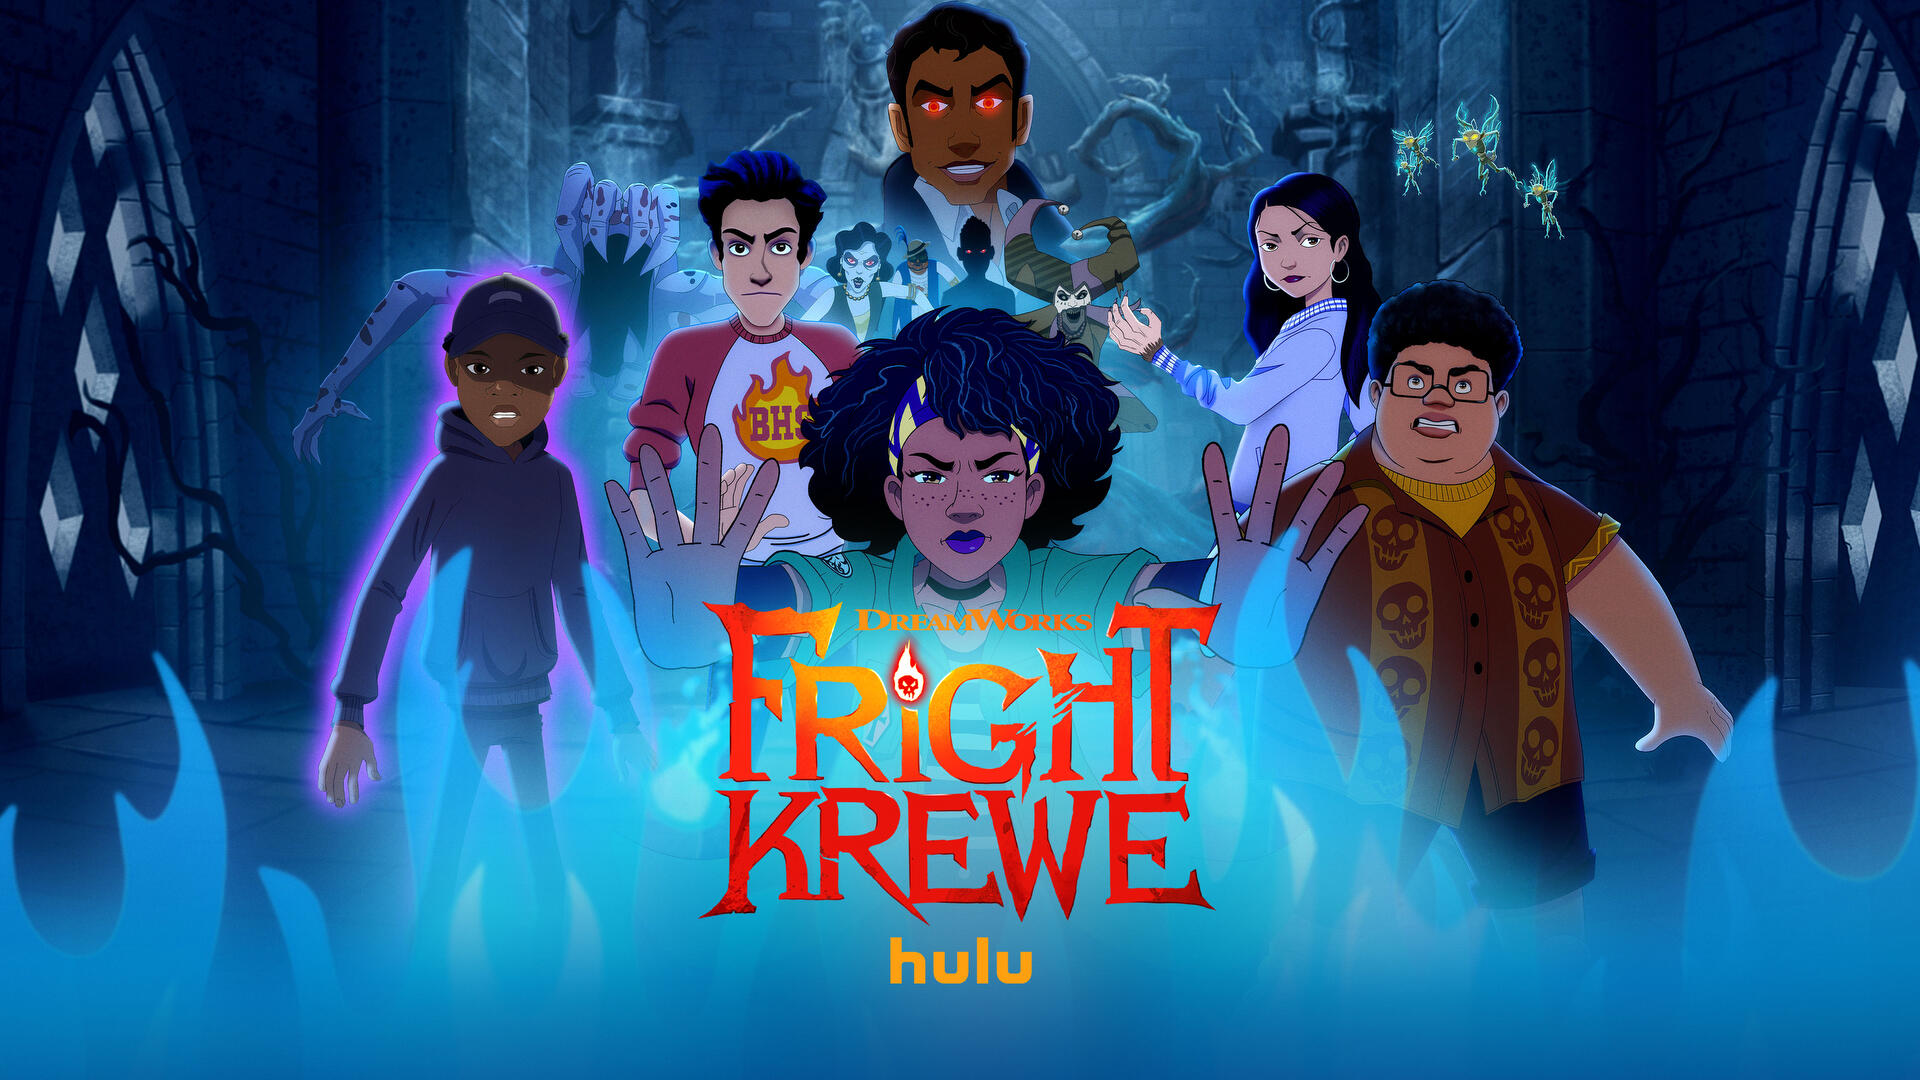 Fright Krewe -- Season 2 -- As the threat of Belial looms large, the Fright Krewe and their newfound supernatural allies, the rougarous and vampires come together for an unprecedented battle to save the world. But with Belial resurrecting every demonic entity known to evil kind will the superpowers gifted to the teens by the loas prove stronger than the diabolical forces unleashed? (Courtesy of DreamWorks)